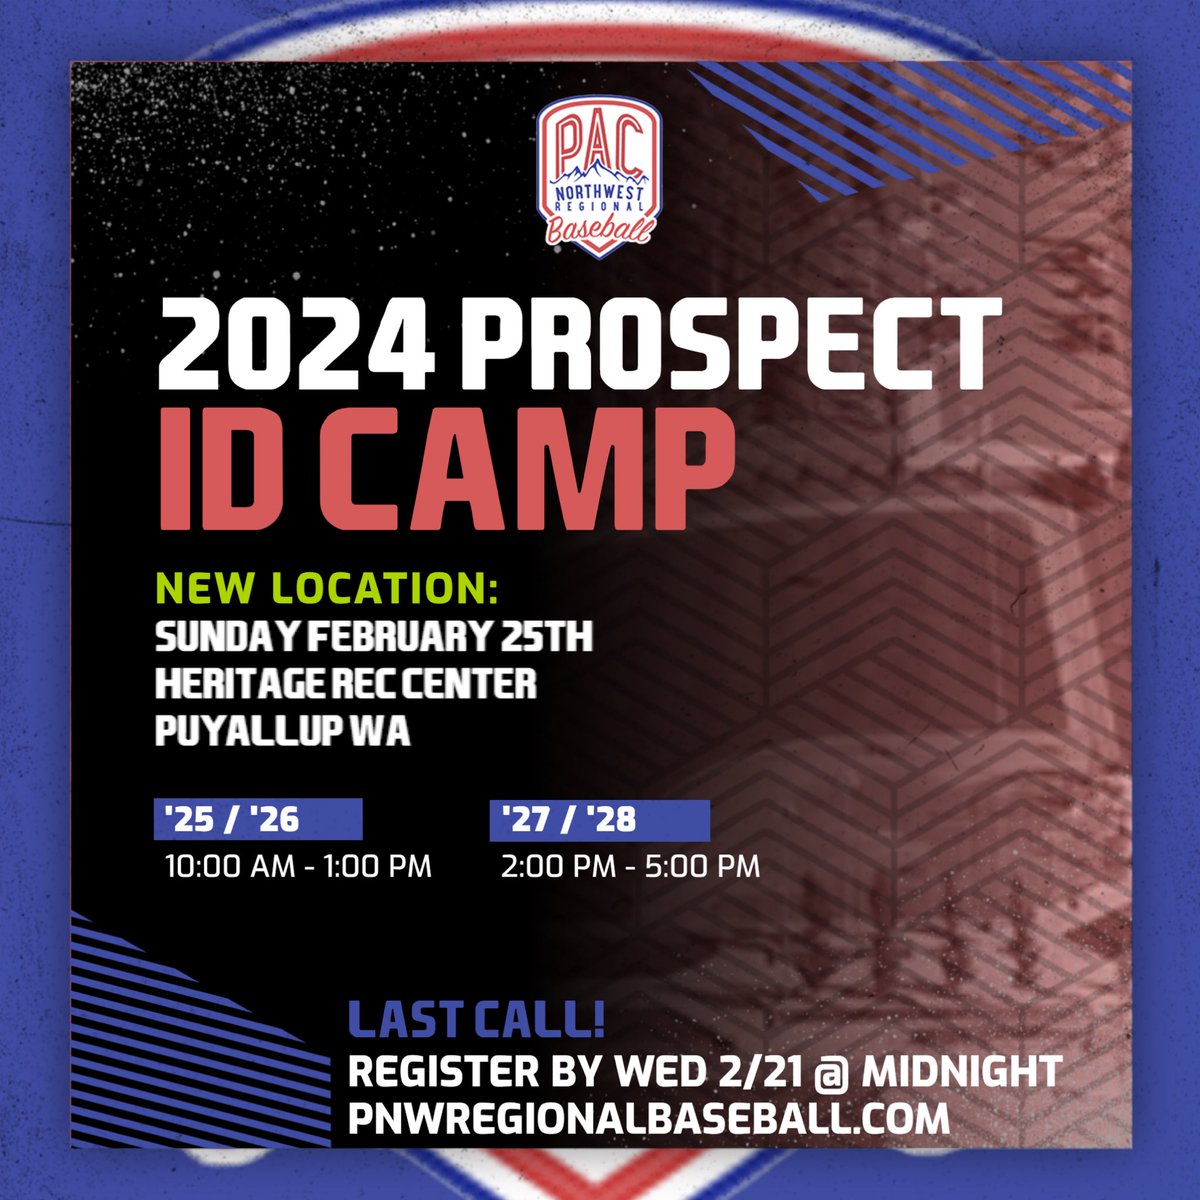 NEW LOCATION FOR SUNDAY 2/25CAMP - Heritage Rec Center (Puyallup) Registration closes TONIGHT at midnight for our preseason ID camp - sign up at pnwregionalbaseball.com 🗓 Sun 2/25 ⌚️ ‘25 / ‘26 - 10 AM - 1 PM ⌚️ ‘27 / ‘28 - 2 PM - 5 PM 📍 Heritage Rec Center - Puyallup, WA